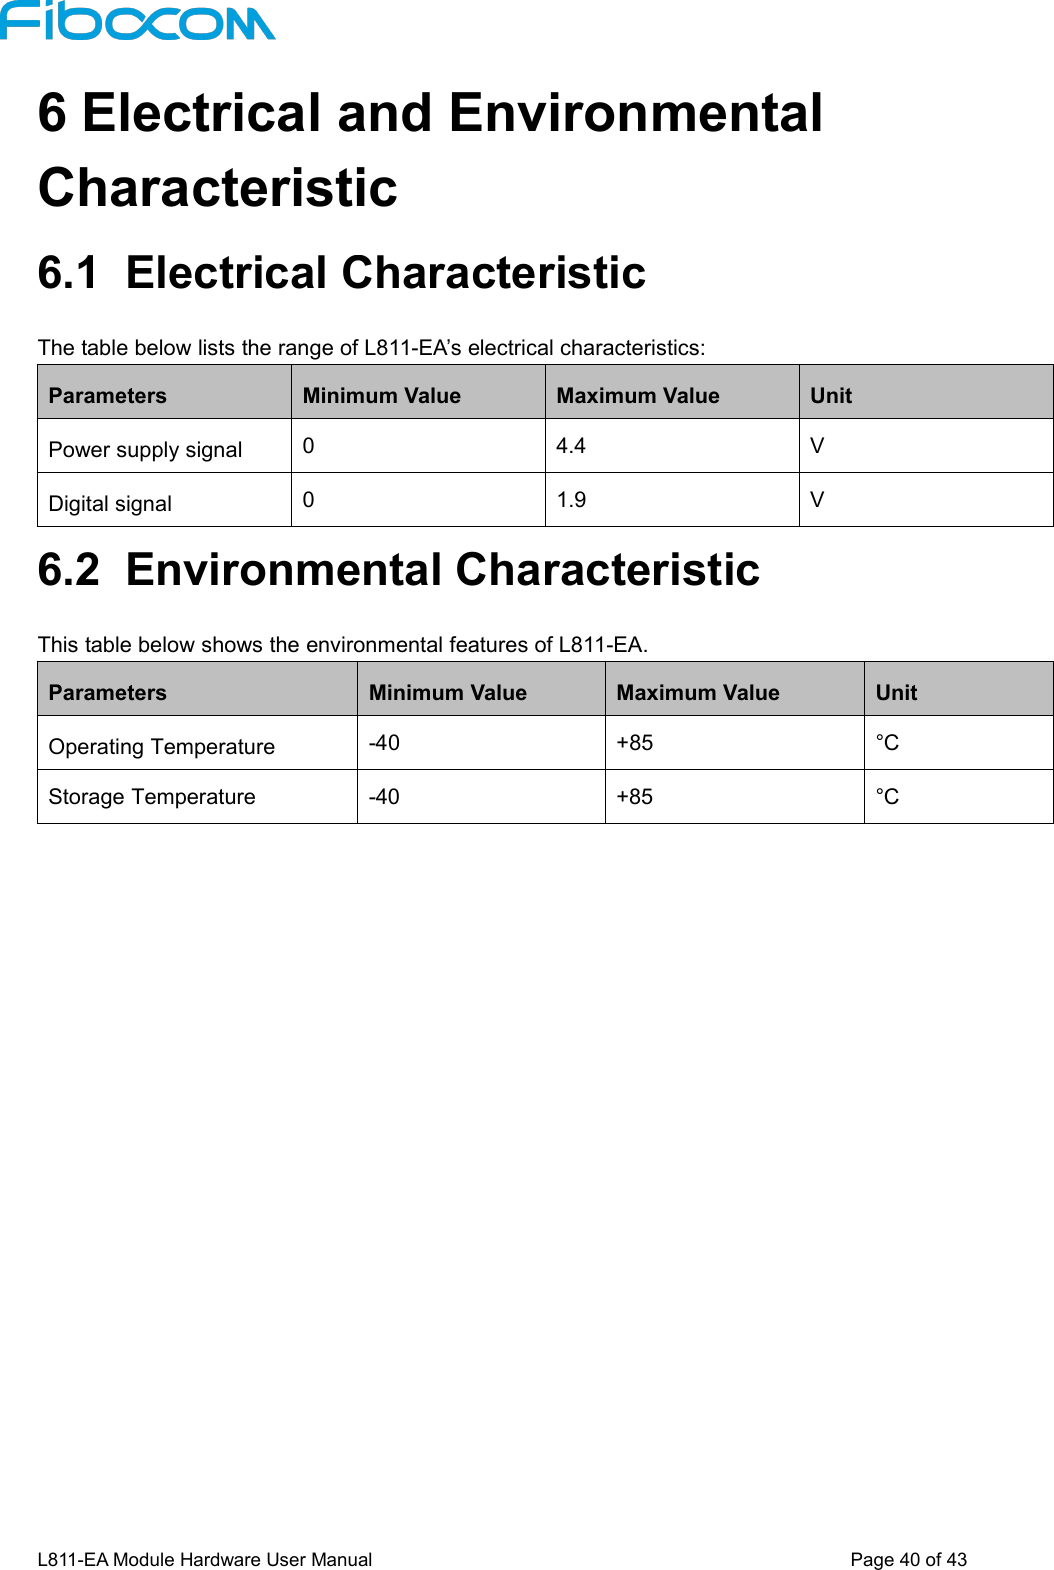 L811-EA Module Hardware User Manual Page40of436 Electrical and EnvironmentalCharacteristic6.1 Electrical CharacteristicThe table below lists the range of L811-EA’s electrical characteristics:ParametersMinimum ValueMaximum ValueUnitPower supply signal04.4VDigital signal01.9V6.2 Environmental CharacteristicThis table below shows the environmental features of L811-EA.ParametersMinimum ValueMaximum ValueUnitOperating Temperature-40+85°CStorage Temperature-40+85°C